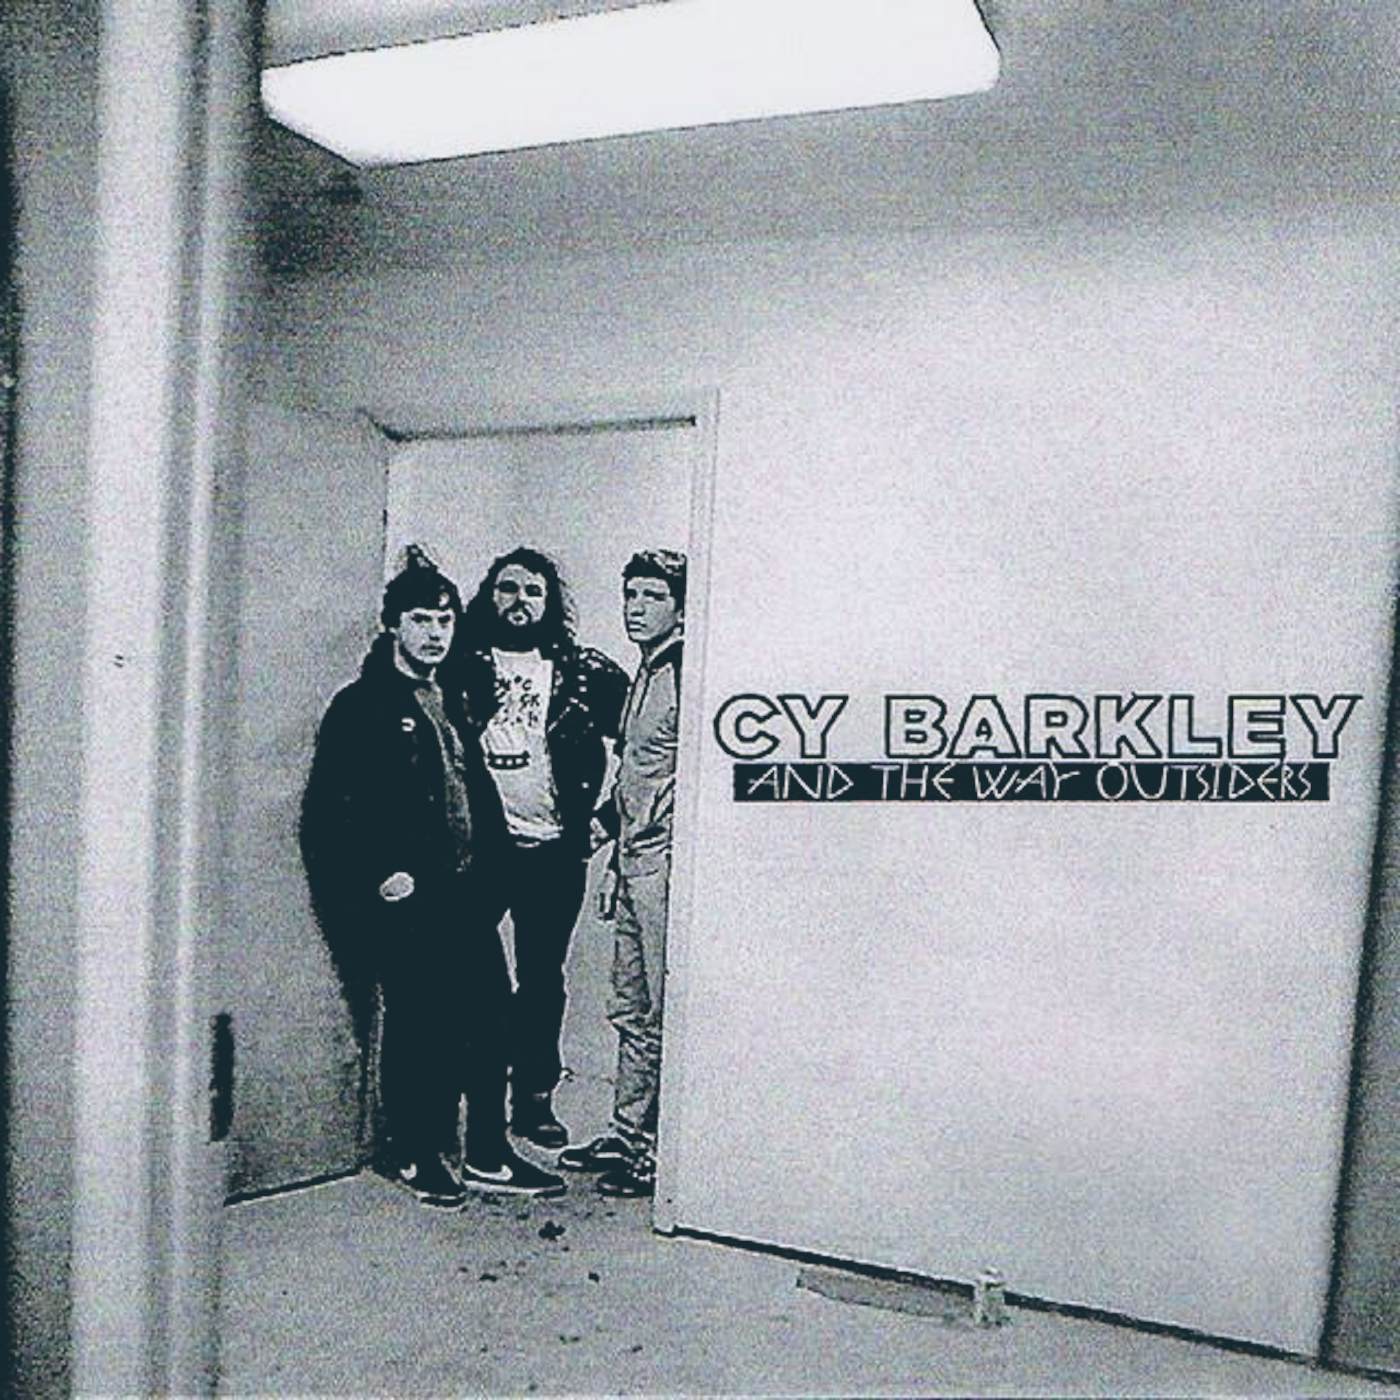 Cy Barkley and The Way Outsiders